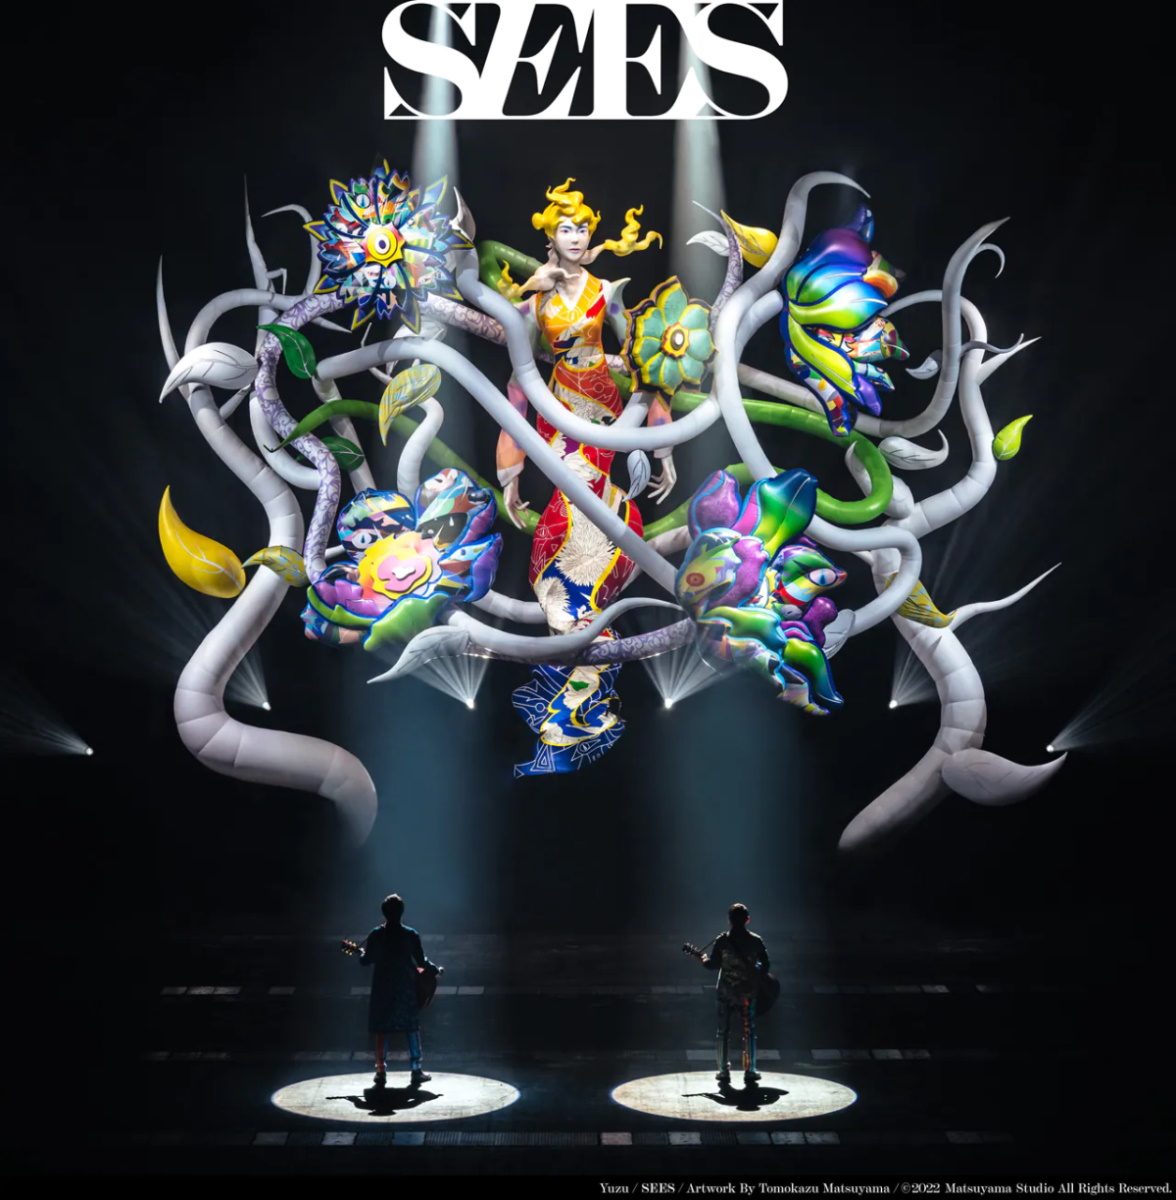 Cover art for『YUZU - Isezaki』from the release『SEES』